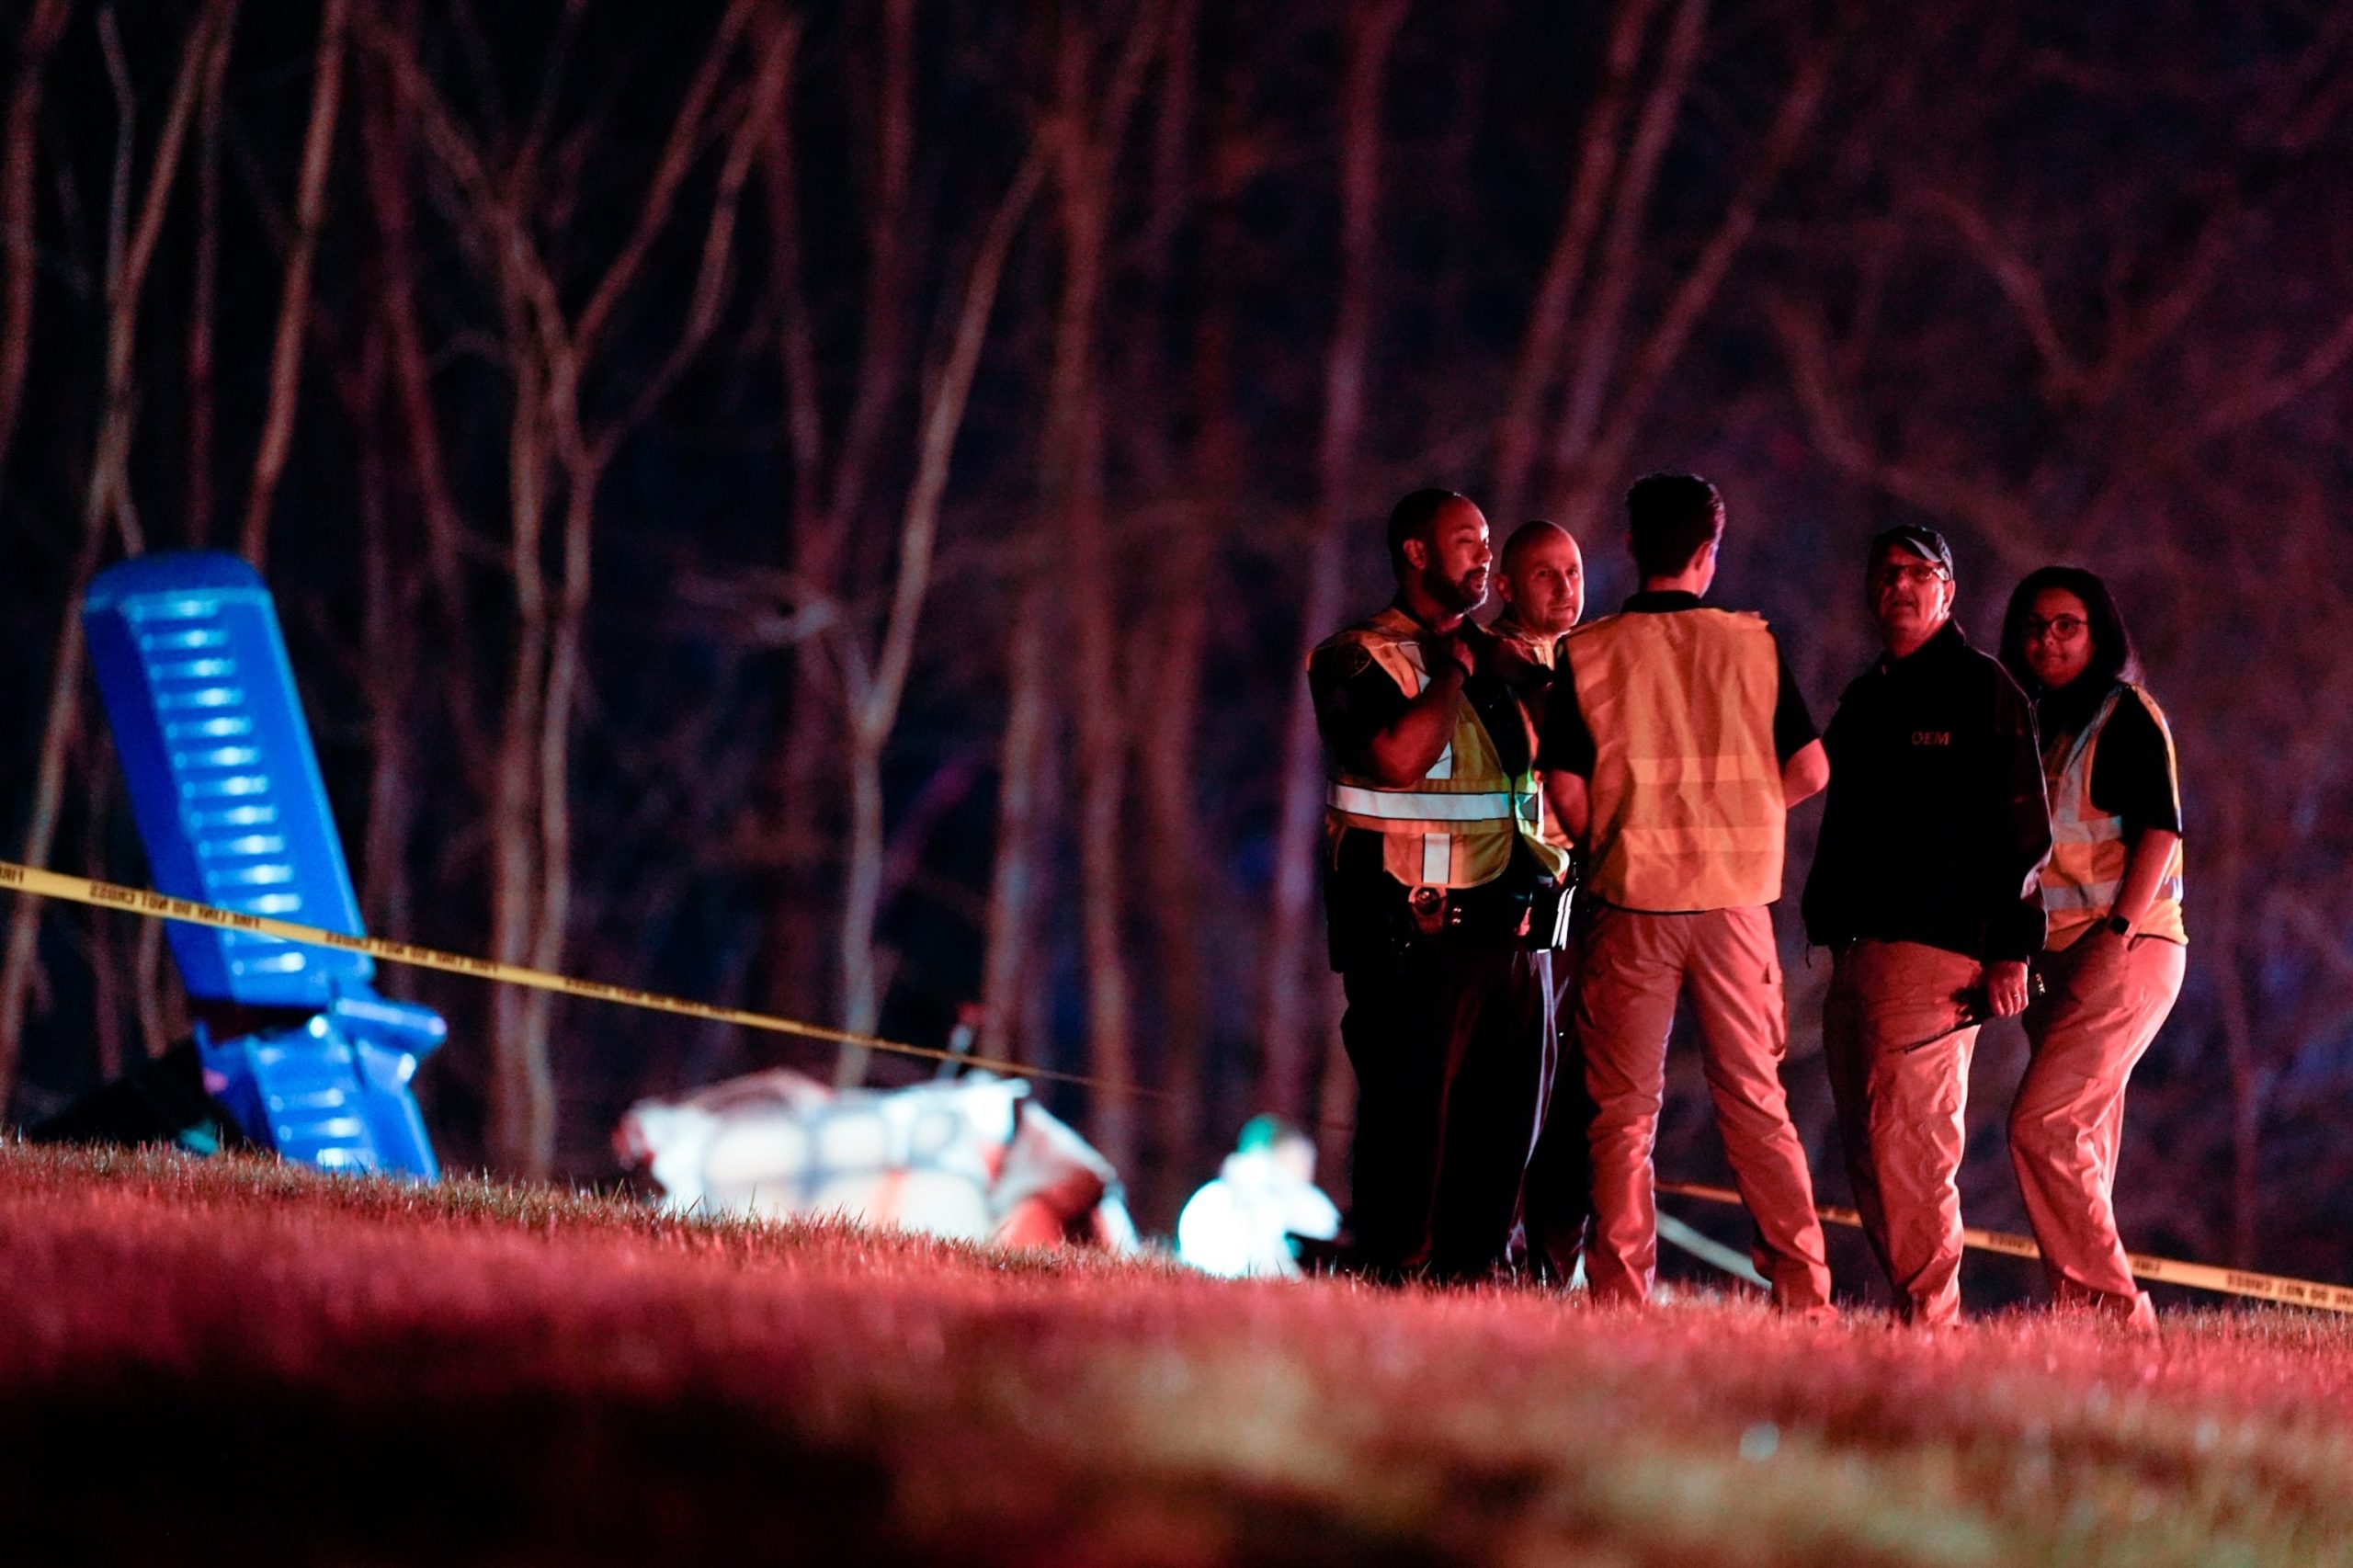 Police report that 5 individuals have died in a single-engine plane crash near I-40 in Nashville.